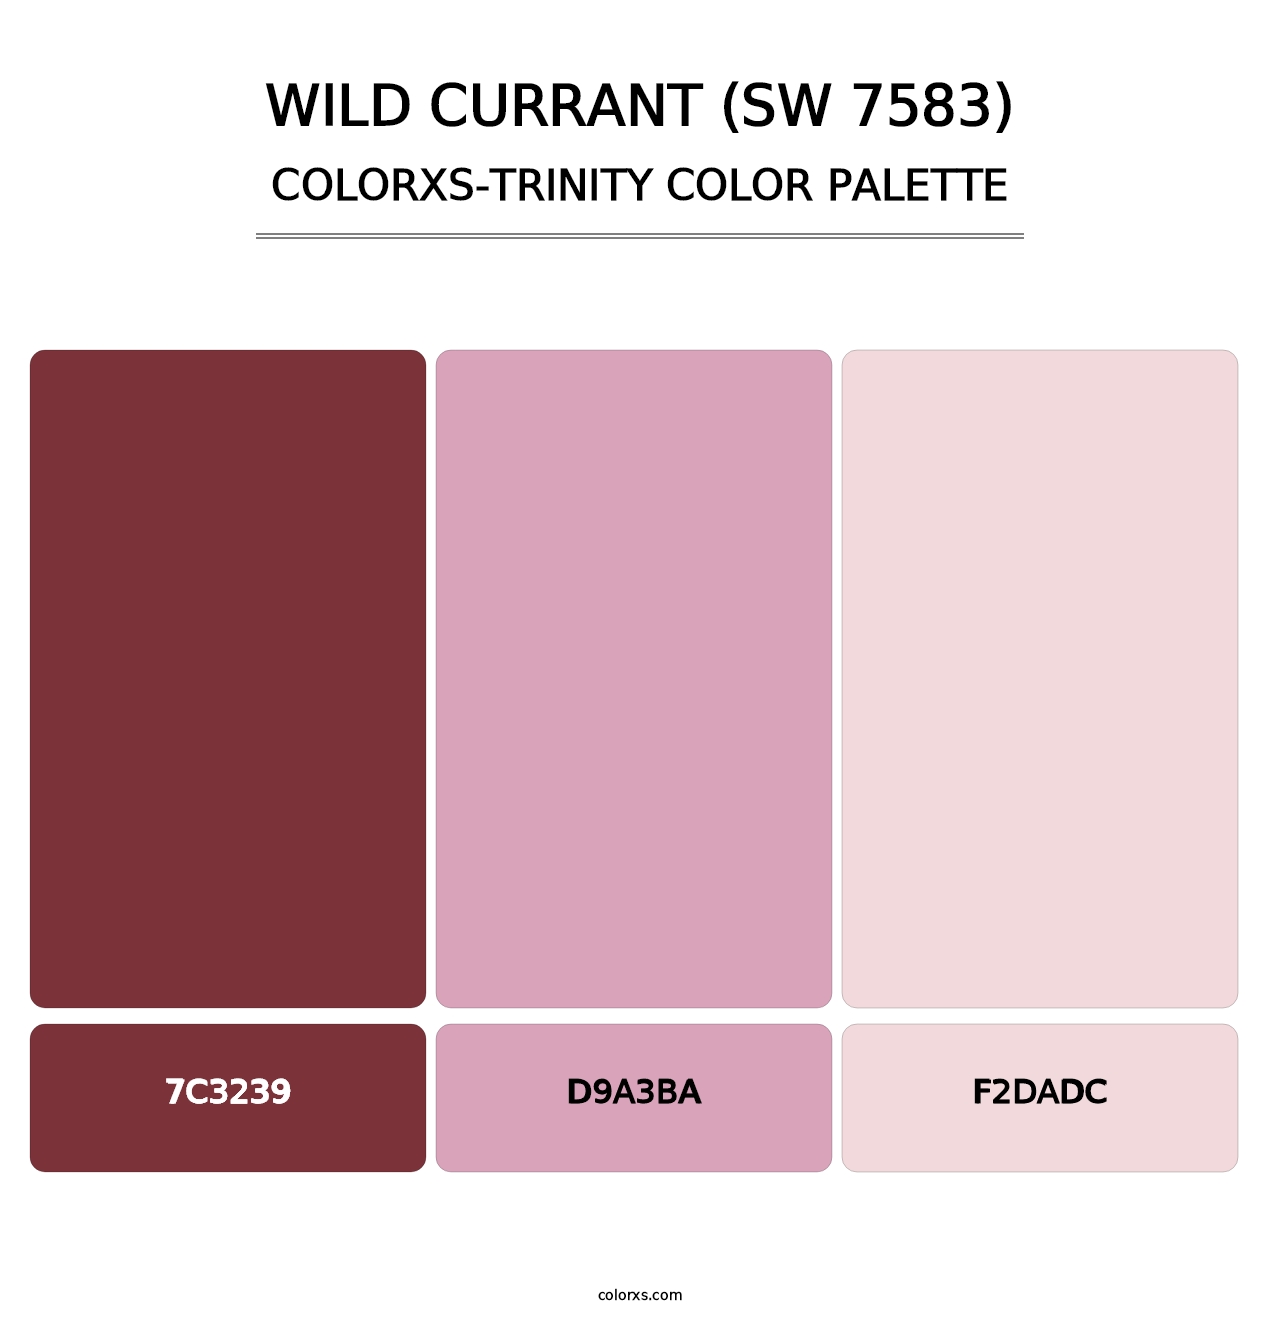 Wild Currant (SW 7583) - Colorxs Trinity Palette